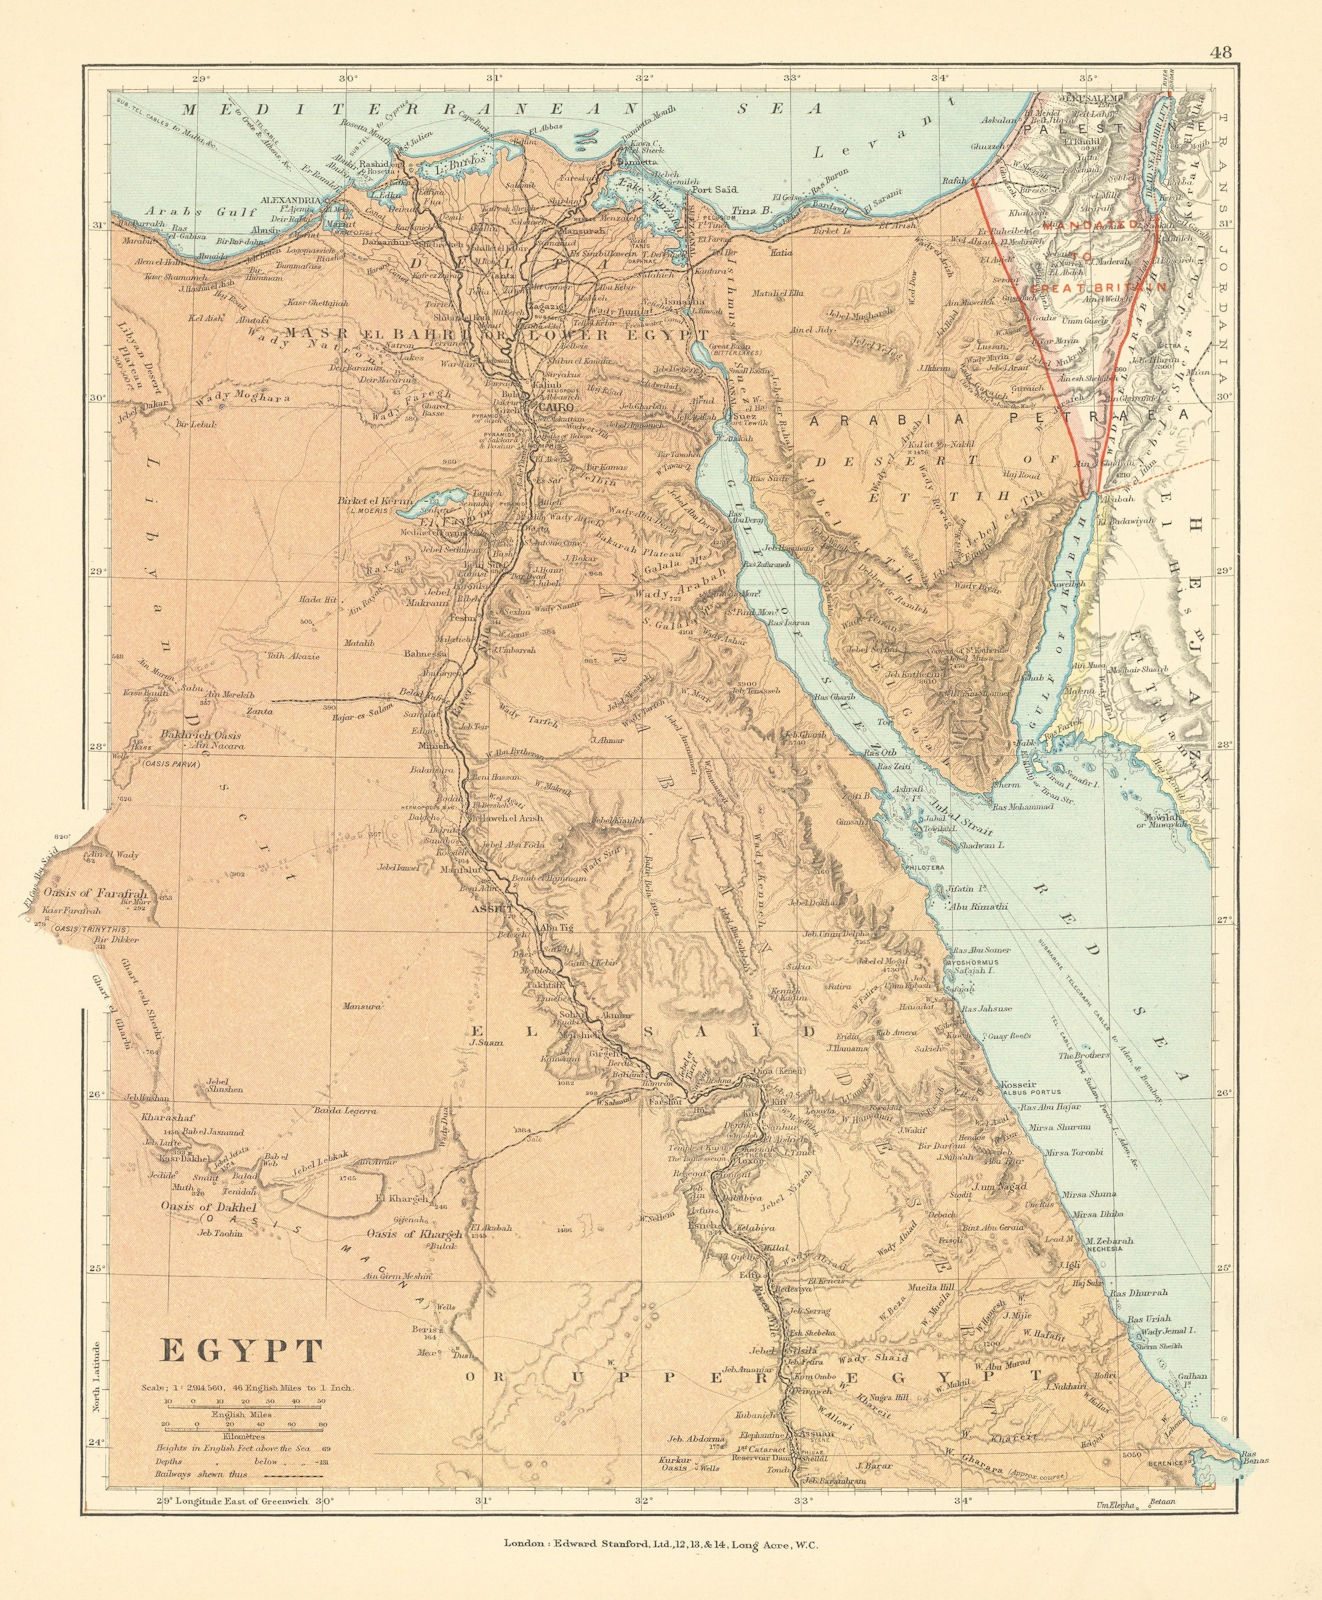 Associate Product Egypt. Nile Valley. Gulf of Suez. Red Sea. STANFORD c1925 old vintage map